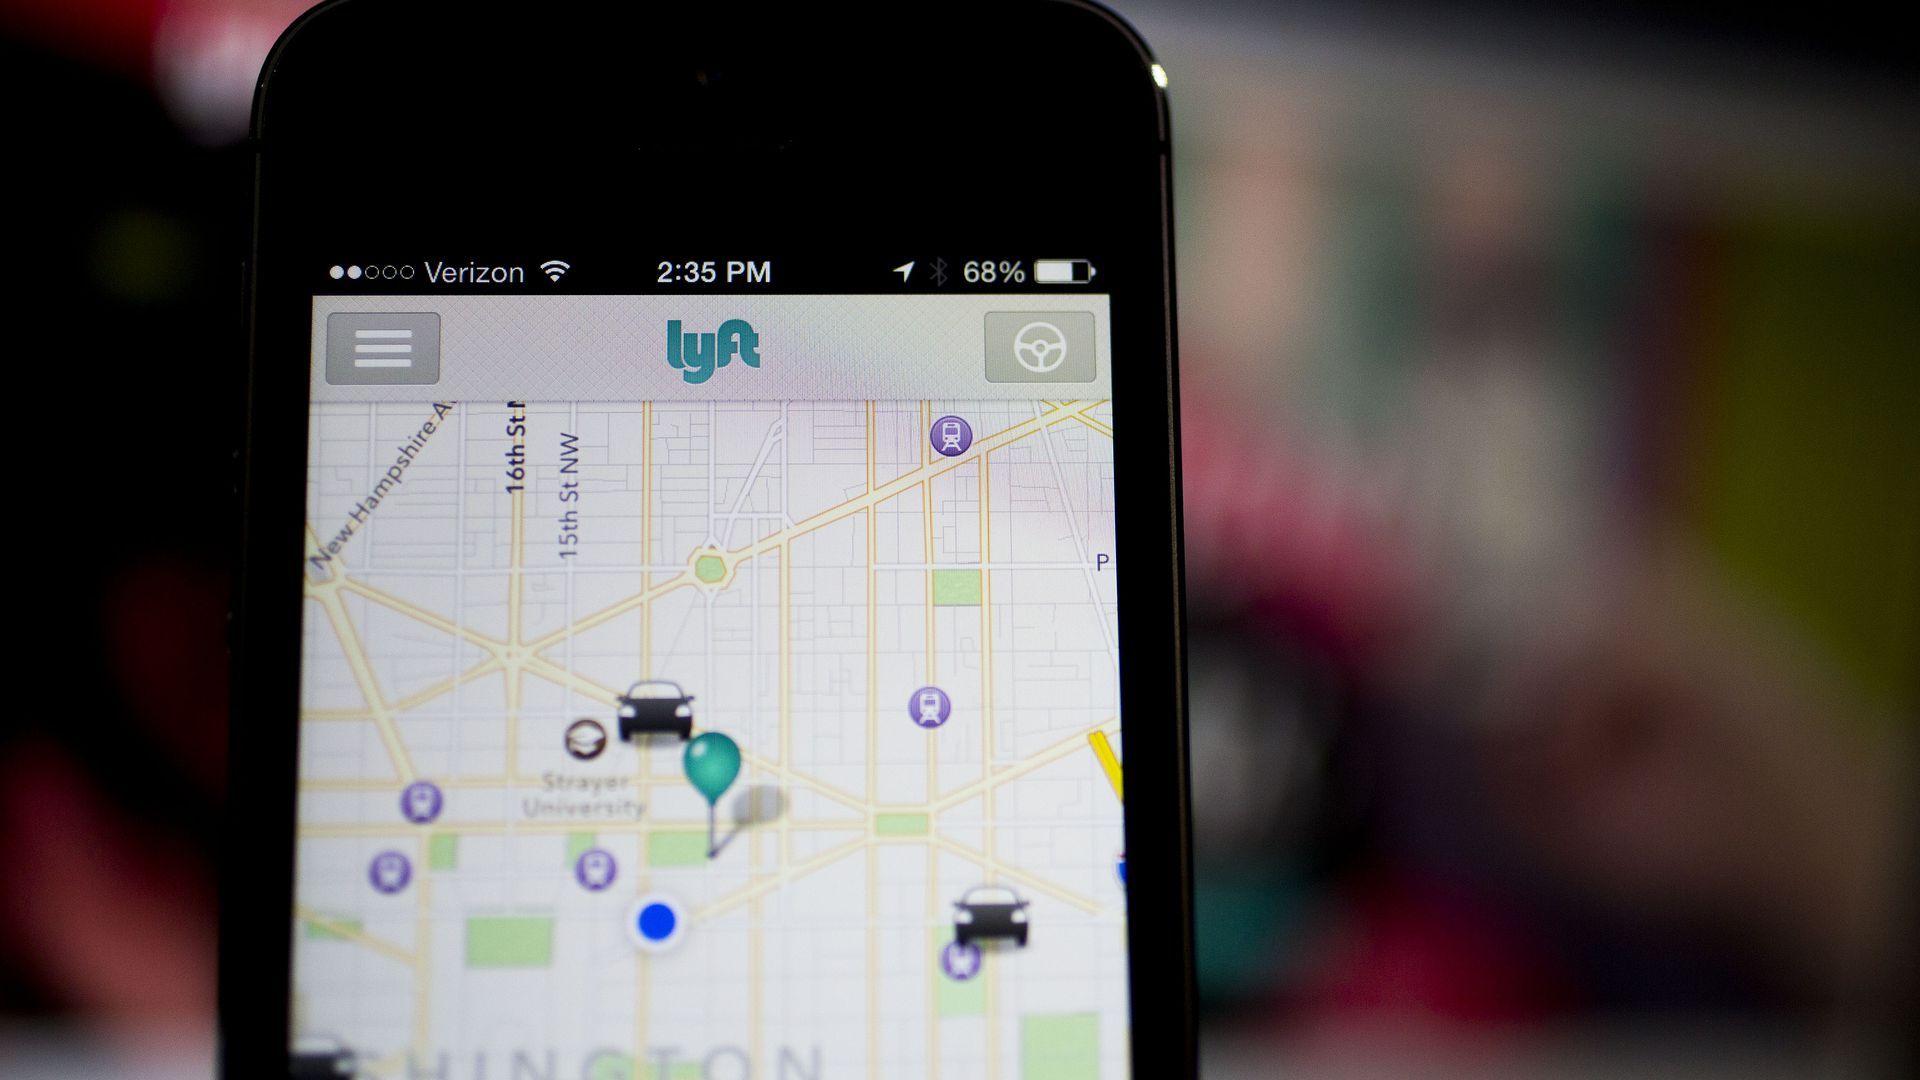 Picture of an iPhone with the screen showing a view of the Lyft app